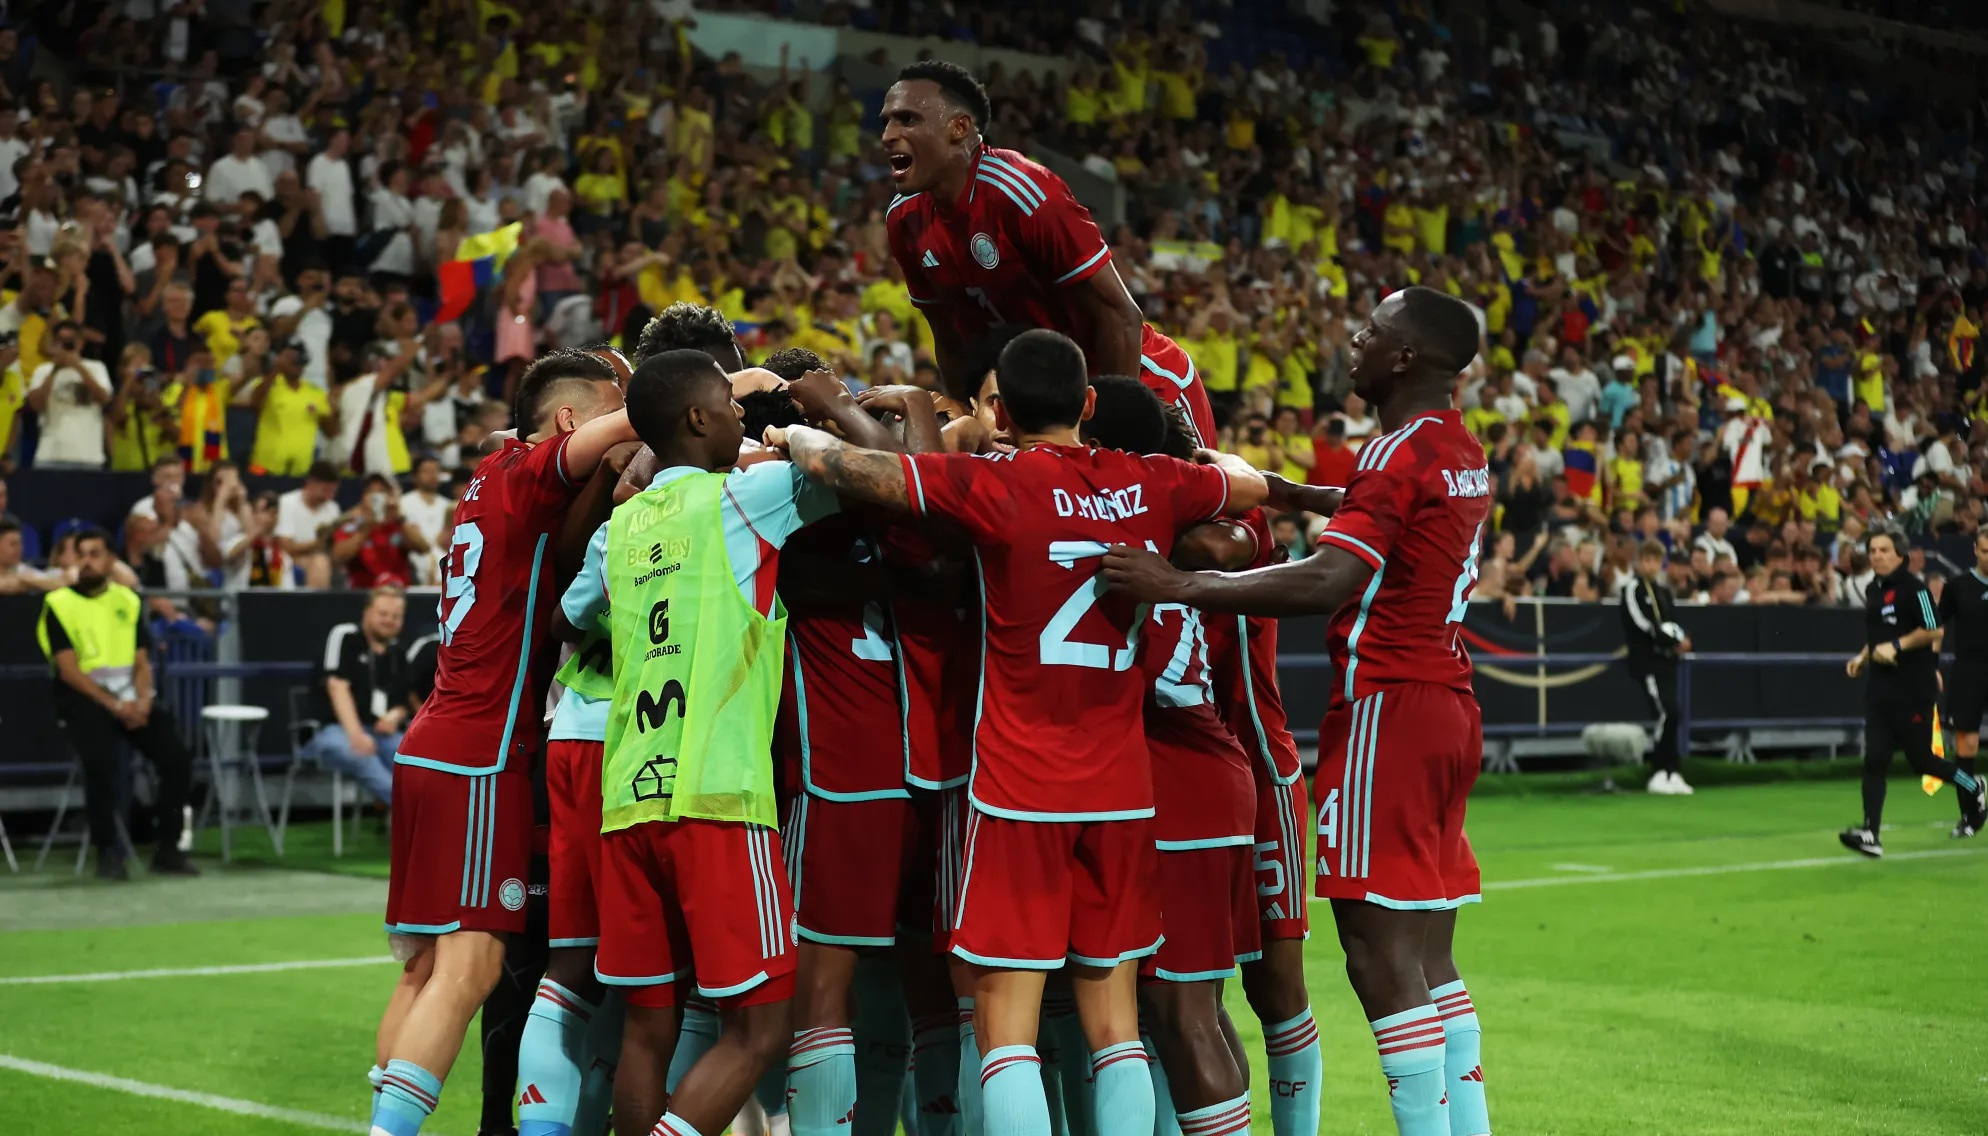 Colombia gives the big surprise by beating Germany for the first time in its history in an exciting match